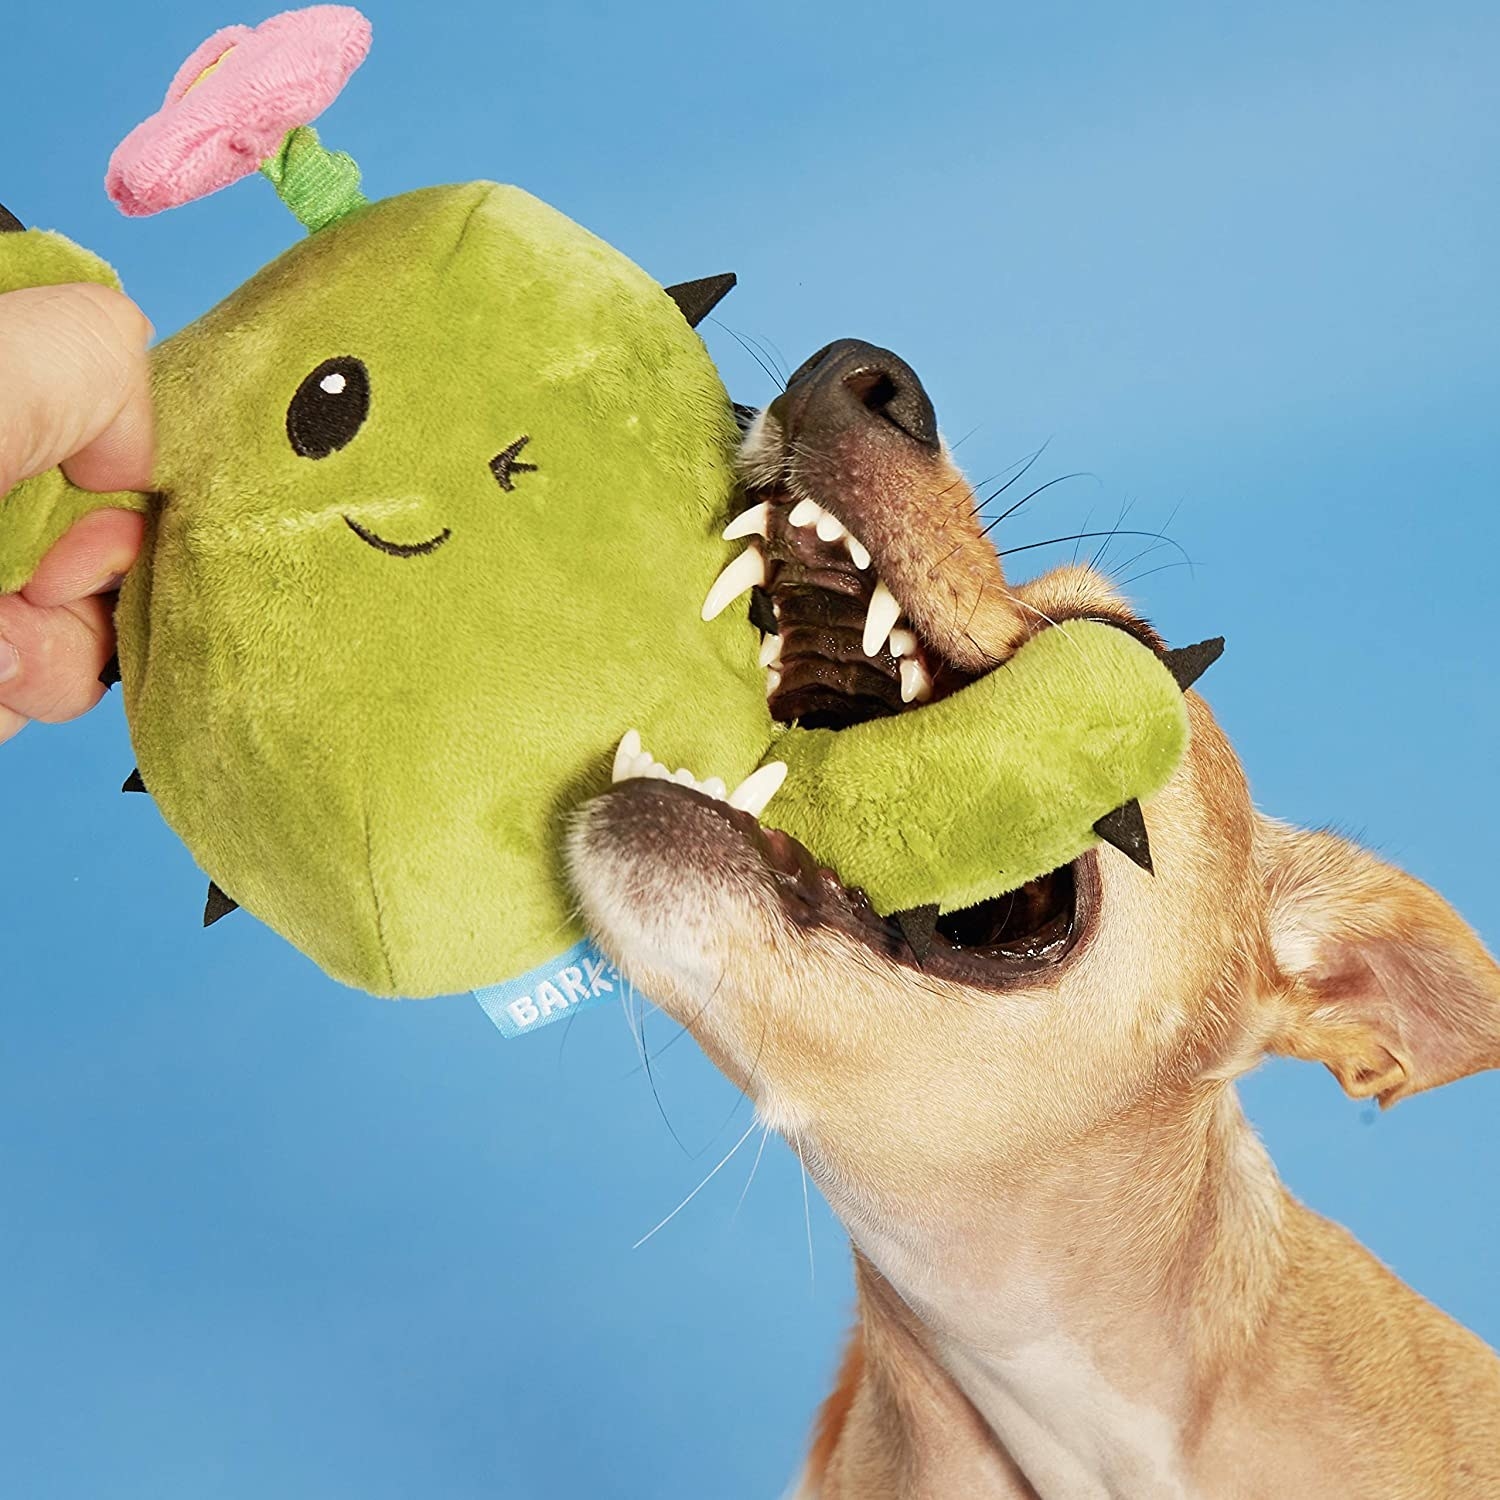 A dog chewing on a green plush cactus toy